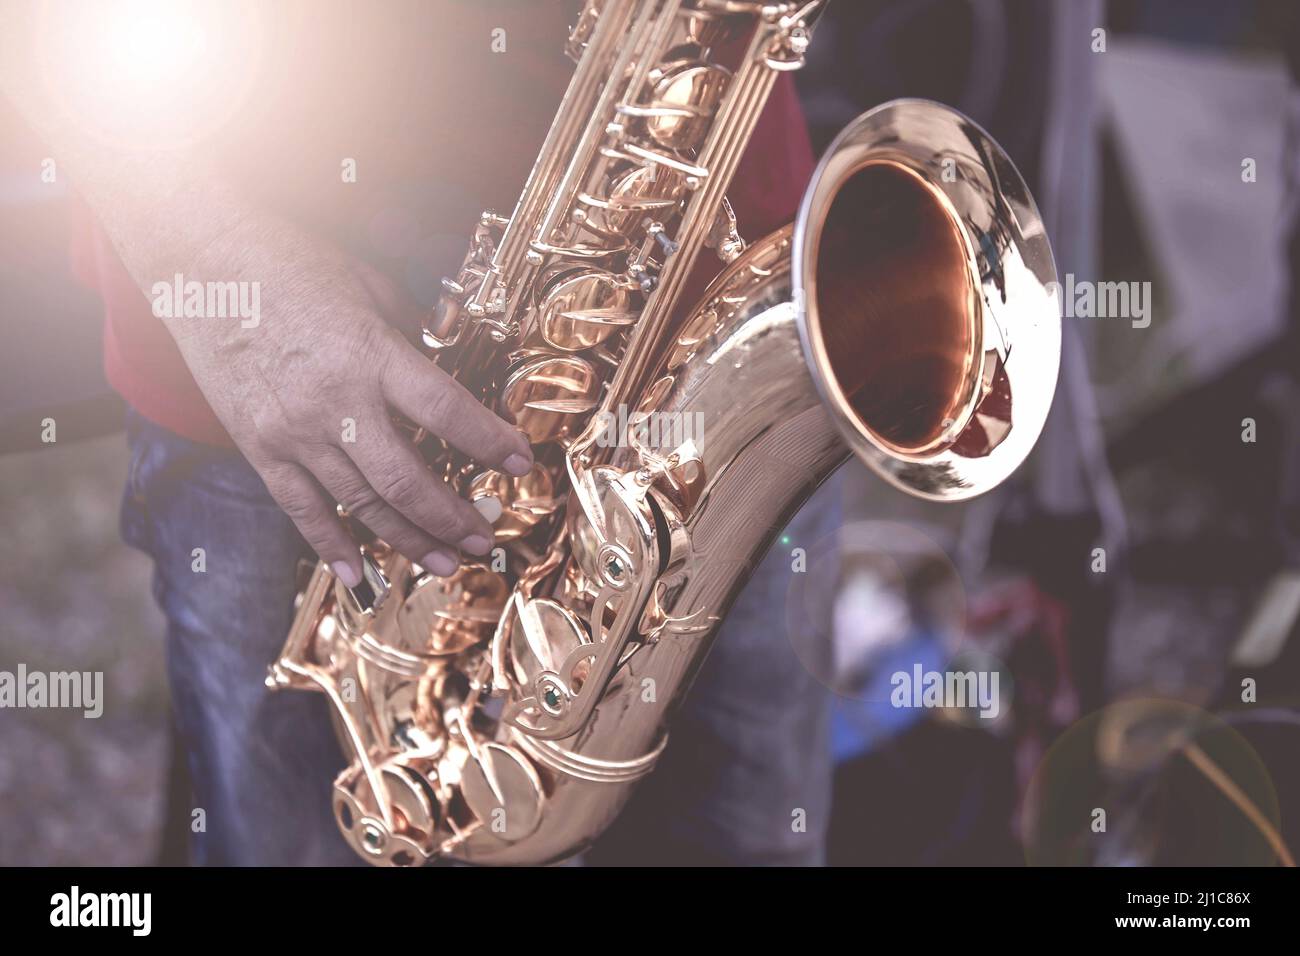 Musical instruments ,Saxophone Player hands Saxophonist playing jazz music. Alto sax musical instrument closeup Stock Photo